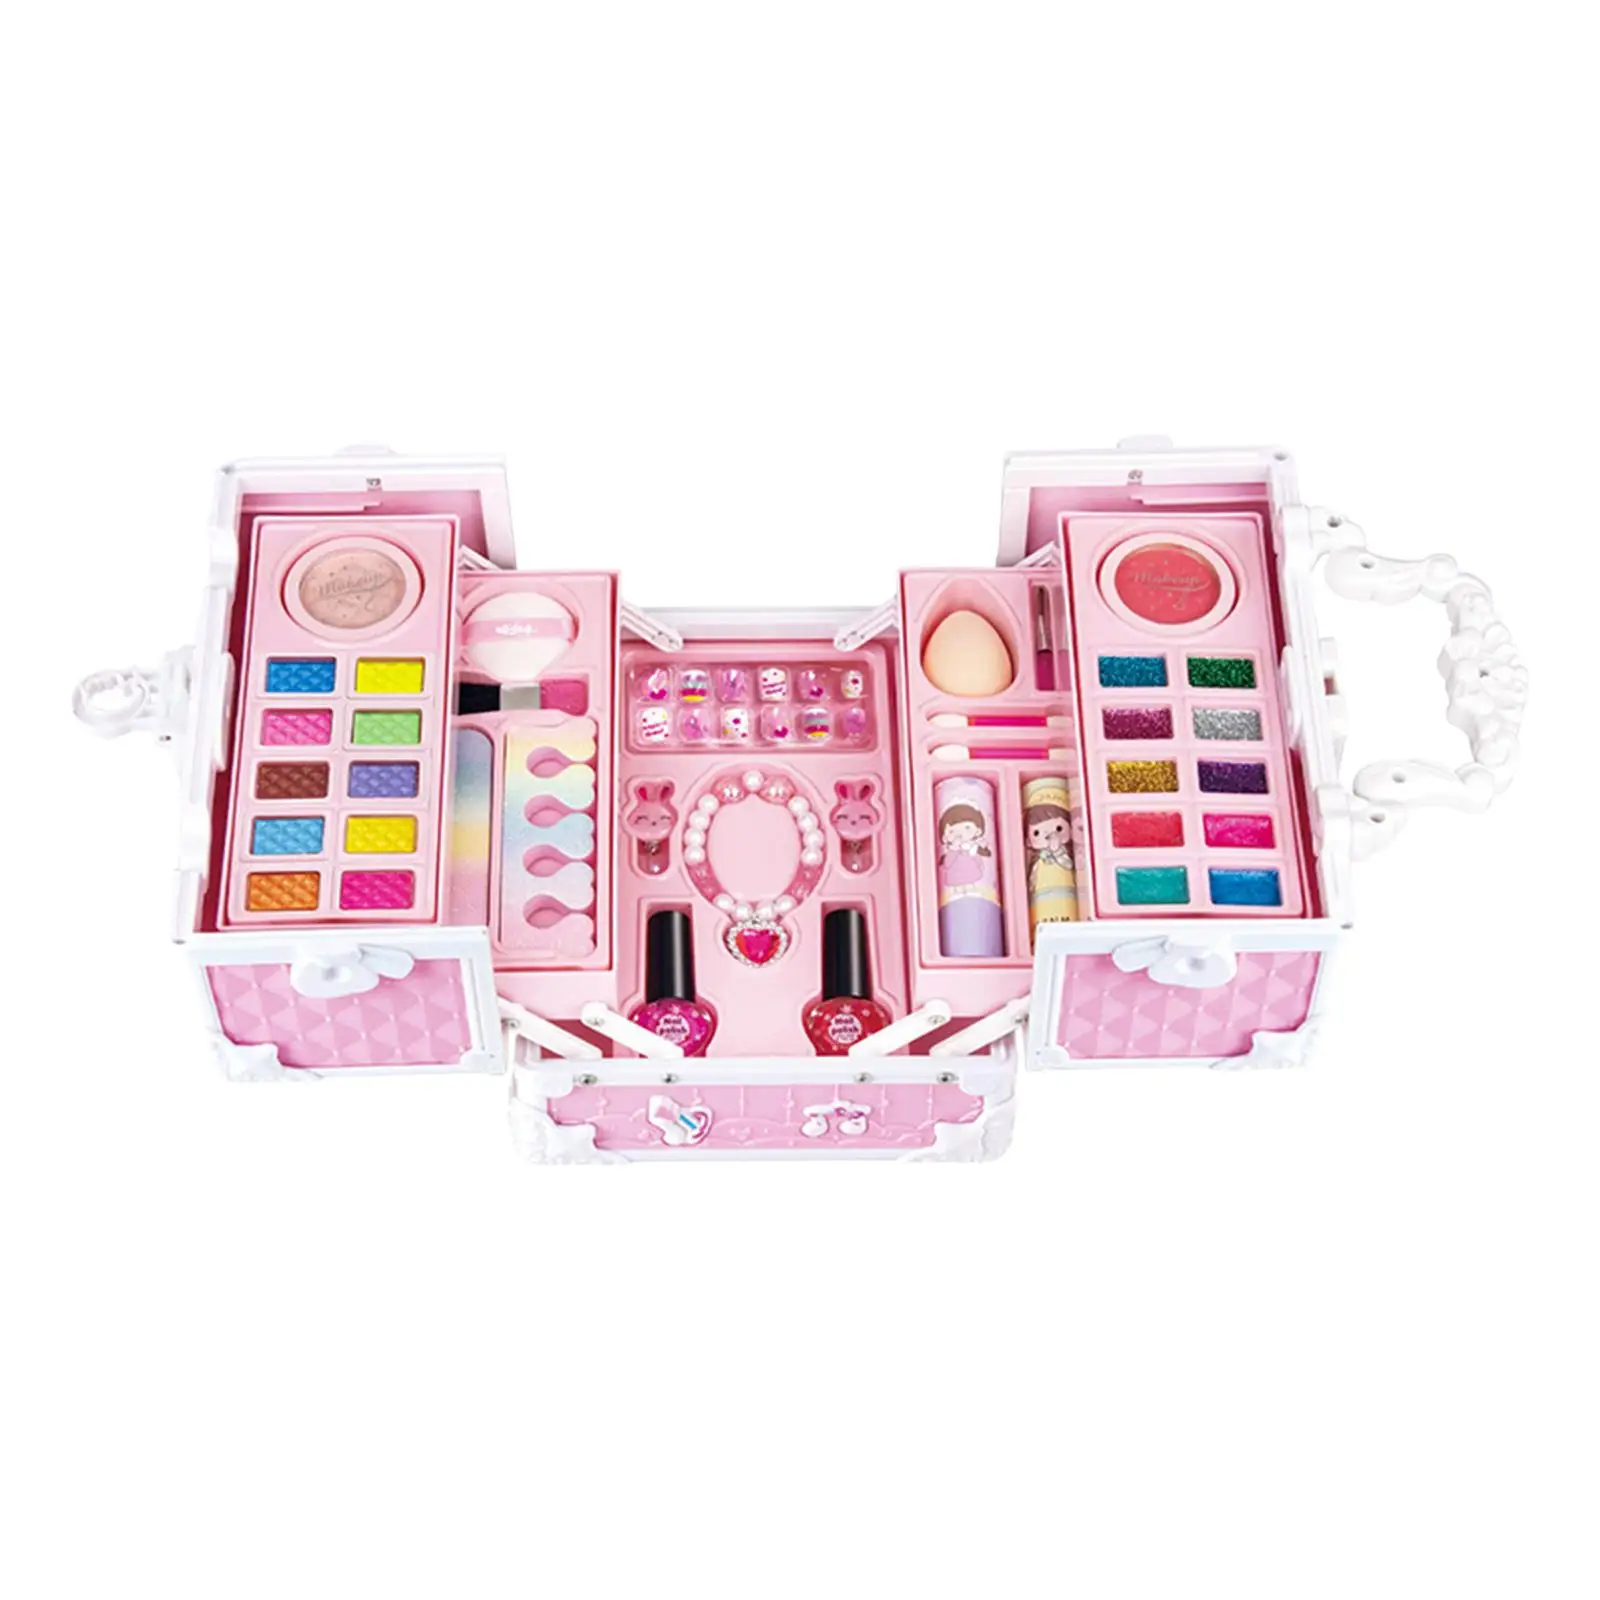 Kids Washable Makeup Girls Toys Role Playing Makeup Toy Kits Pretend Makeup Kits for Toddlers Girls Kids Birthday Toys Gift